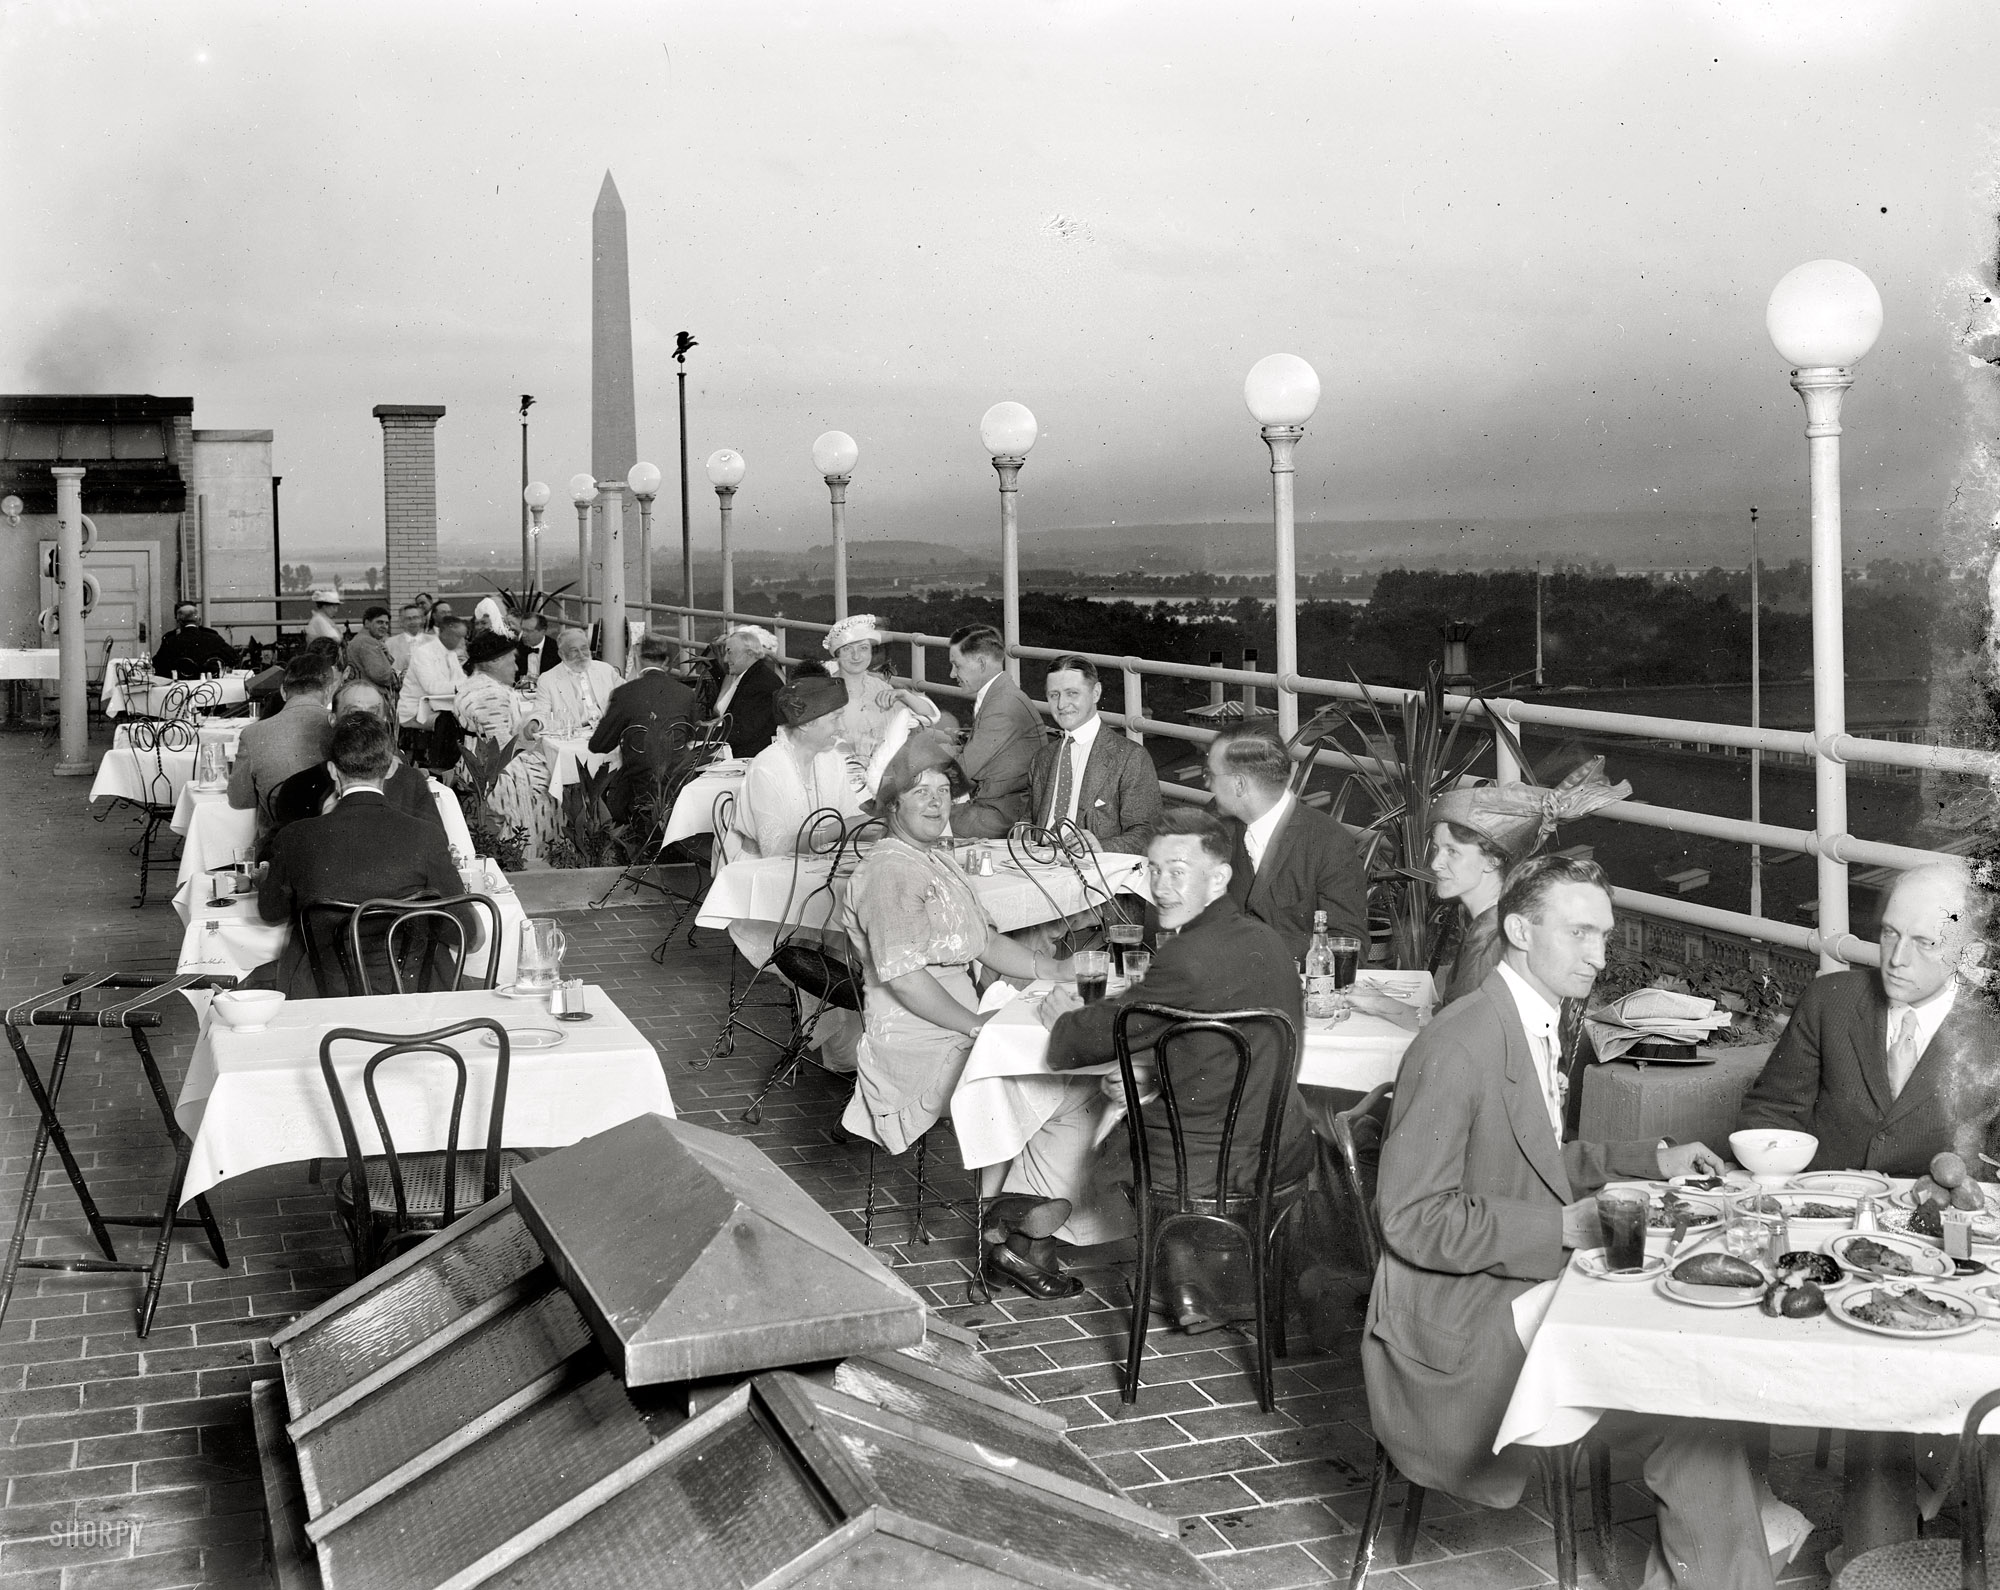 "No caption." Rooftop dining somewhere near the Washington Monument circa 1920. Harris & Ewing Collection glass negative. View full size.